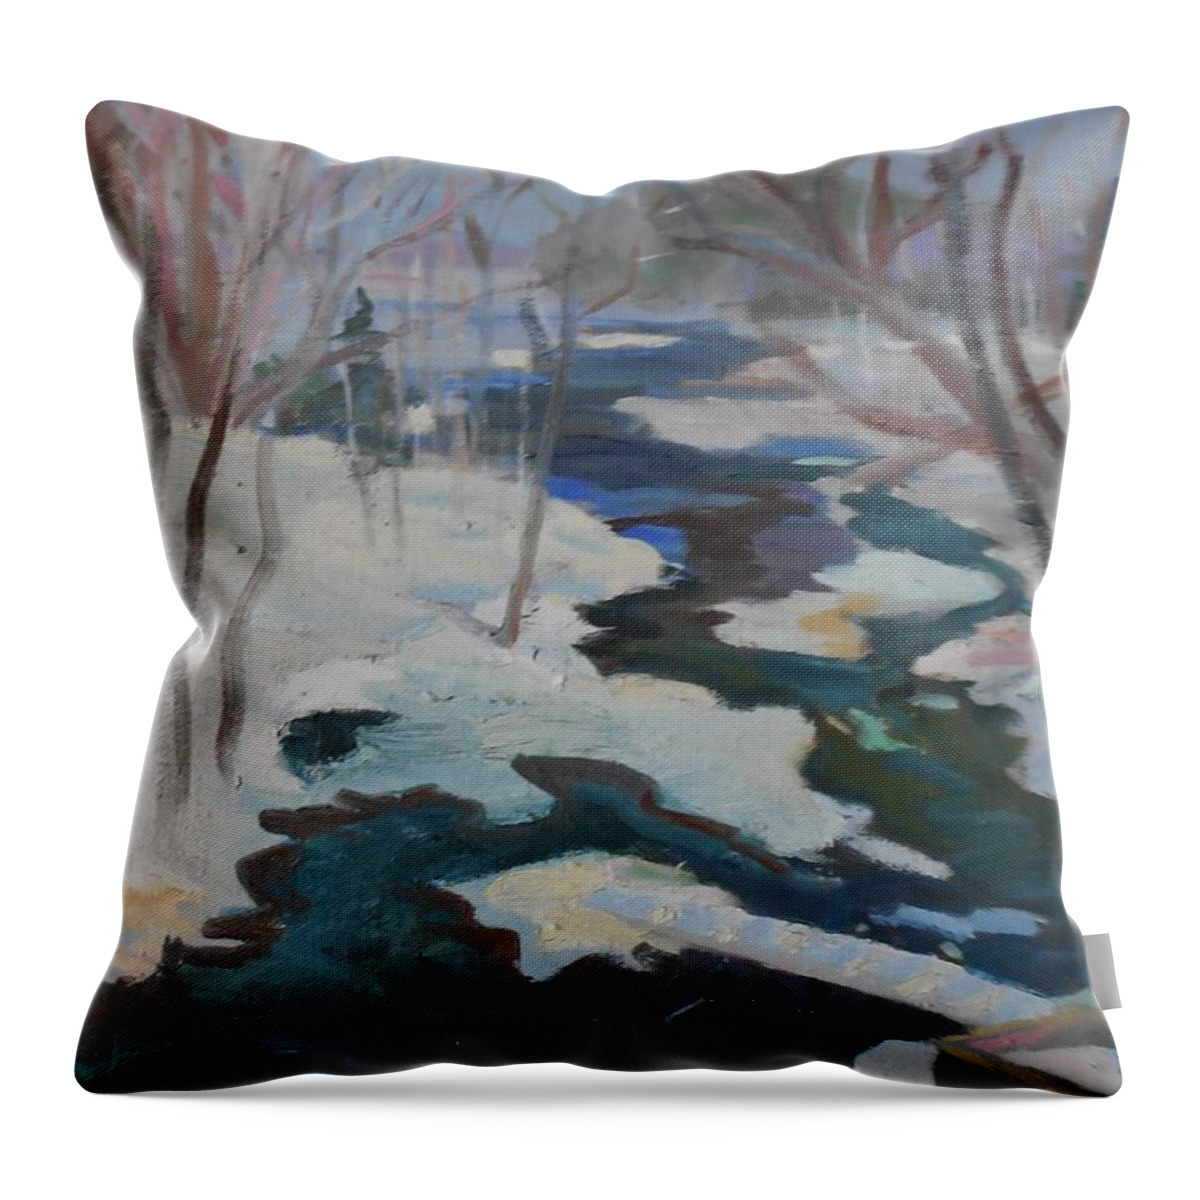 Landscape Throw Pillow featuring the painting Winter Mill Stream by Francine Frank